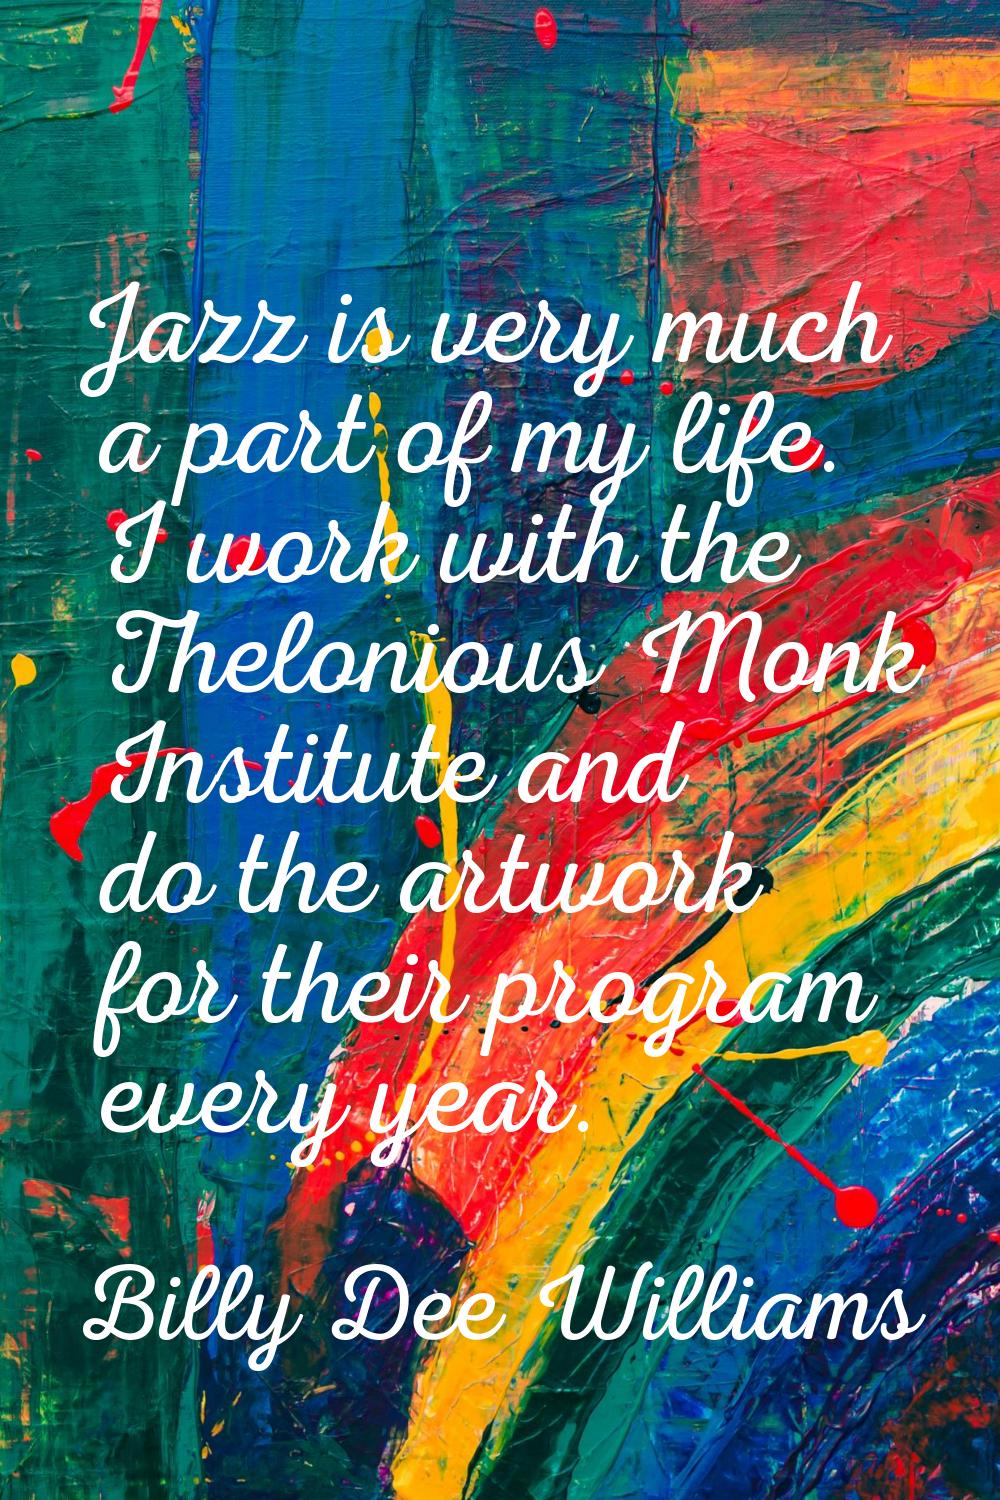 Jazz is very much a part of my life. I work with the Thelonious Monk Institute and do the artwork f